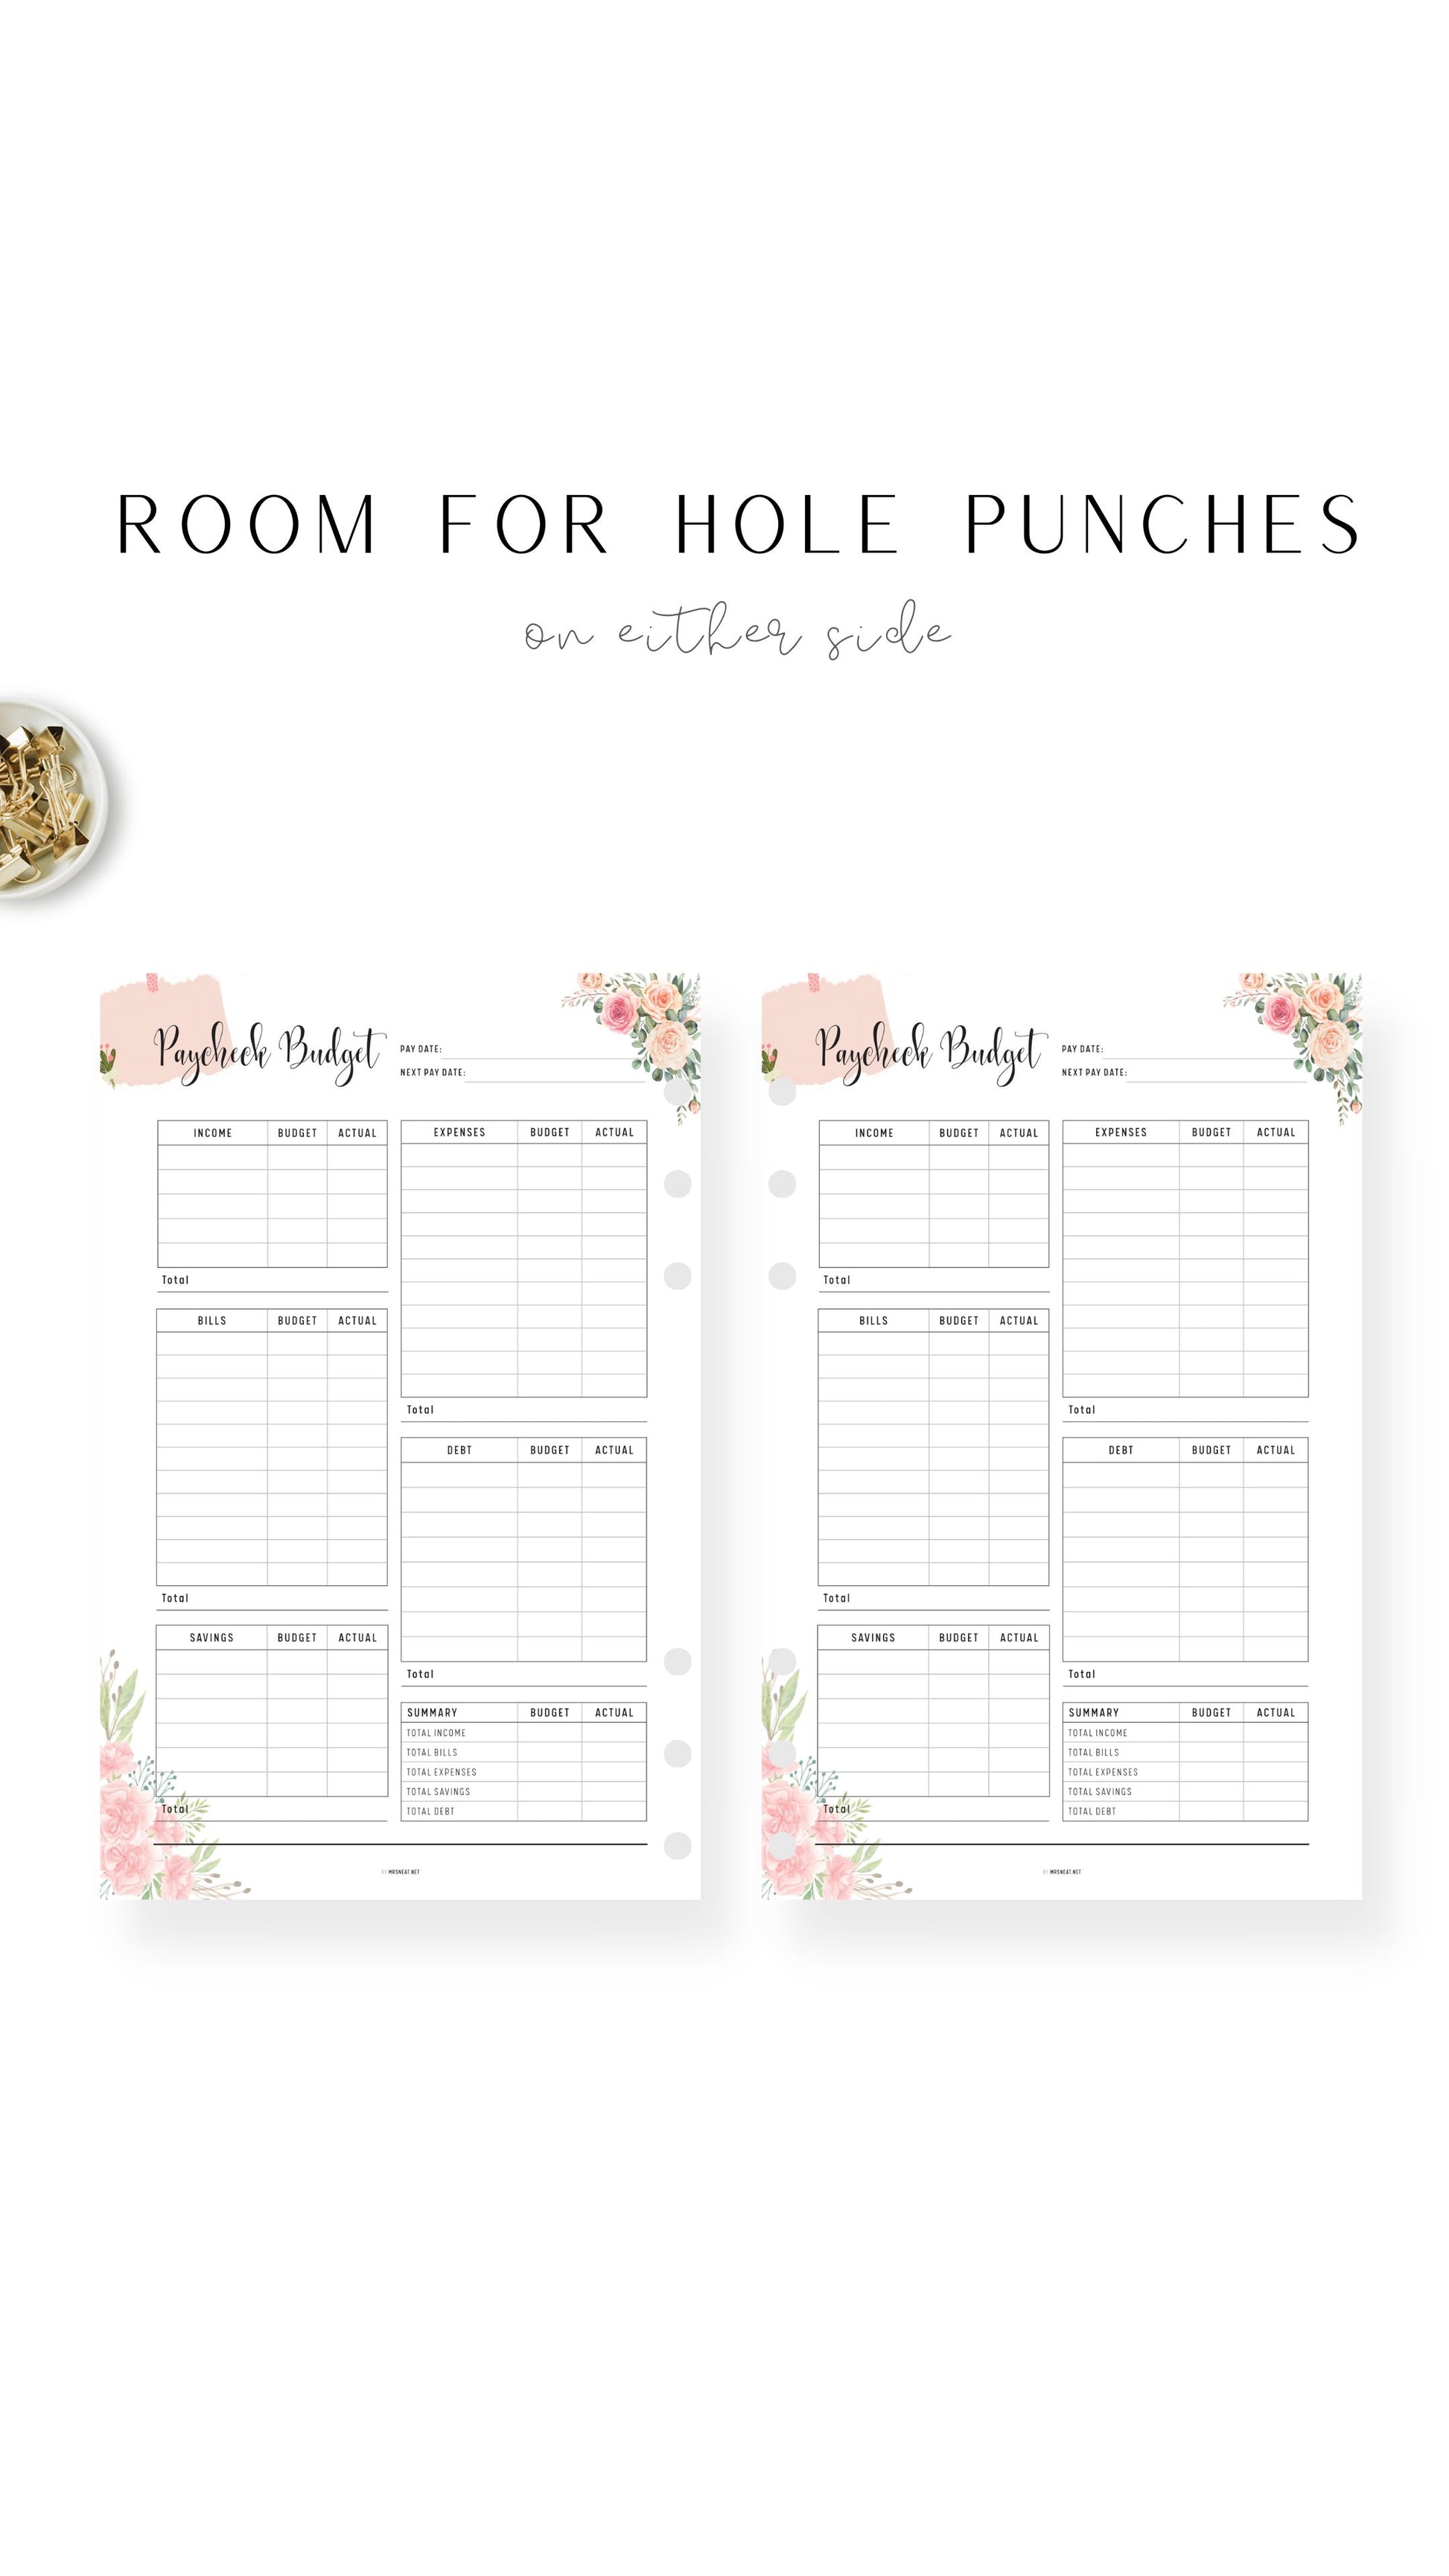 Floral Paycheck Budget Template Printable